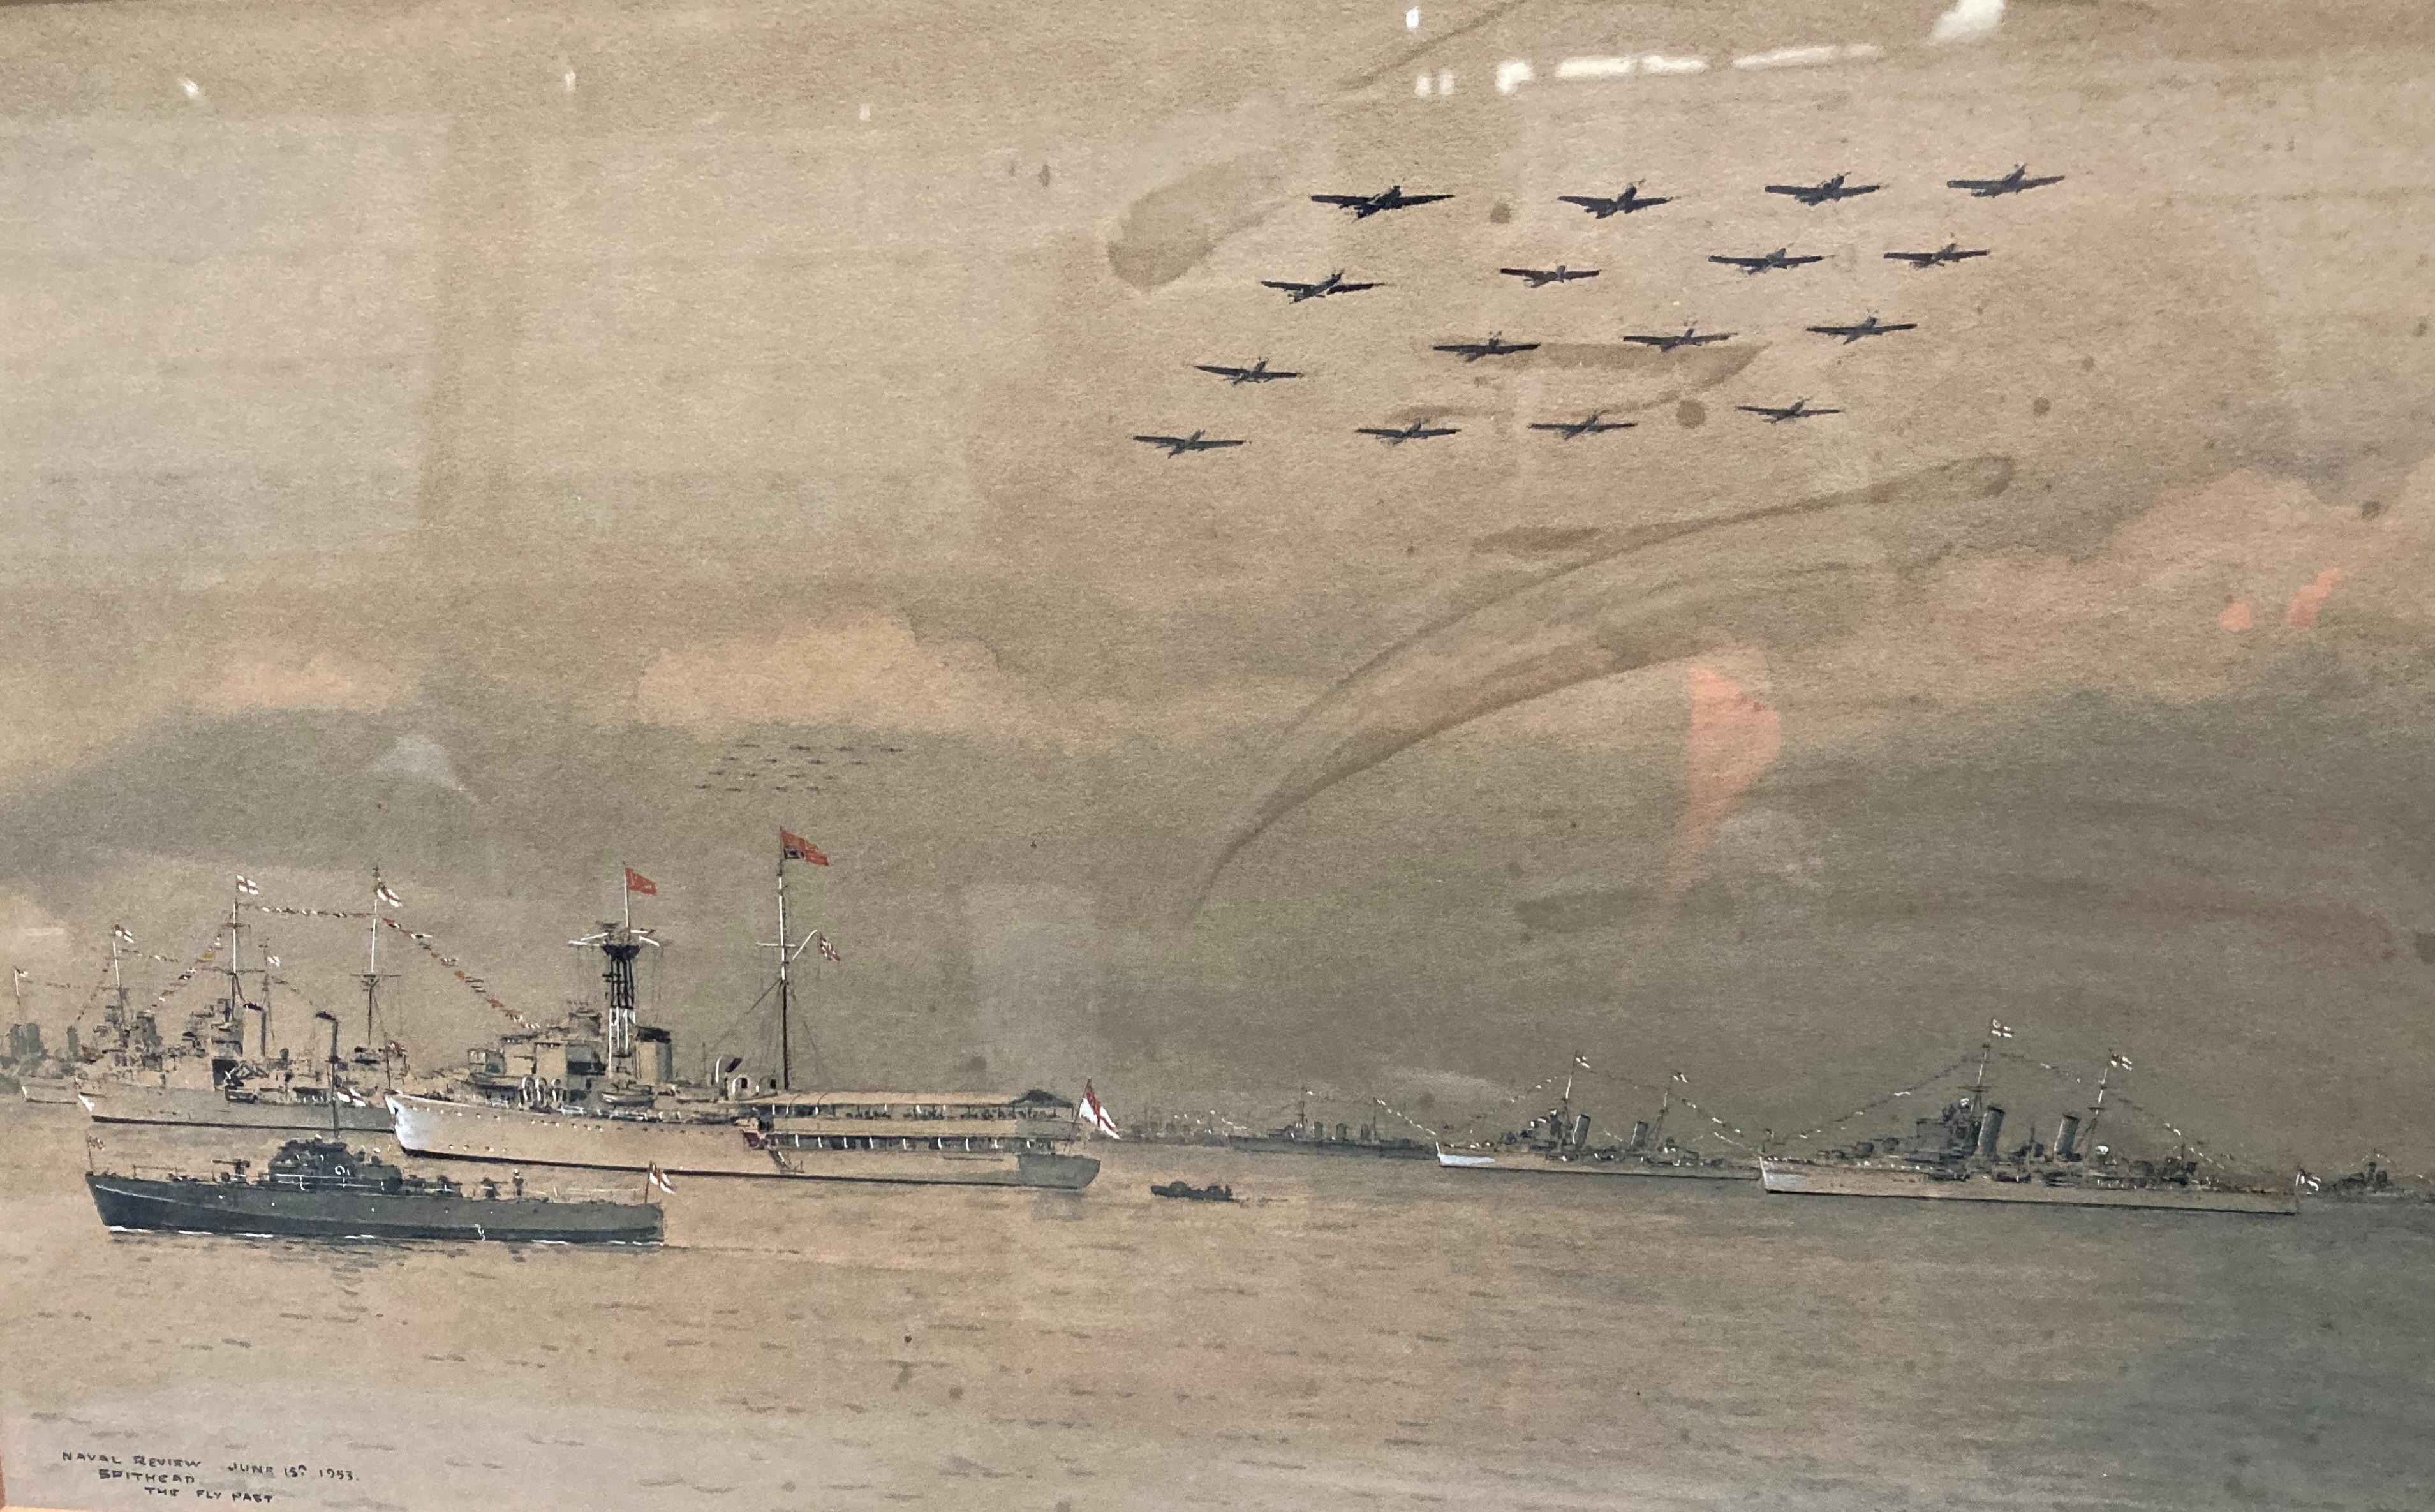 E Tufnell framed watercolour 'Naval Review June 15th 1953 Spithead - The Fly Past' 27 x 42cm (some - Image 2 of 3